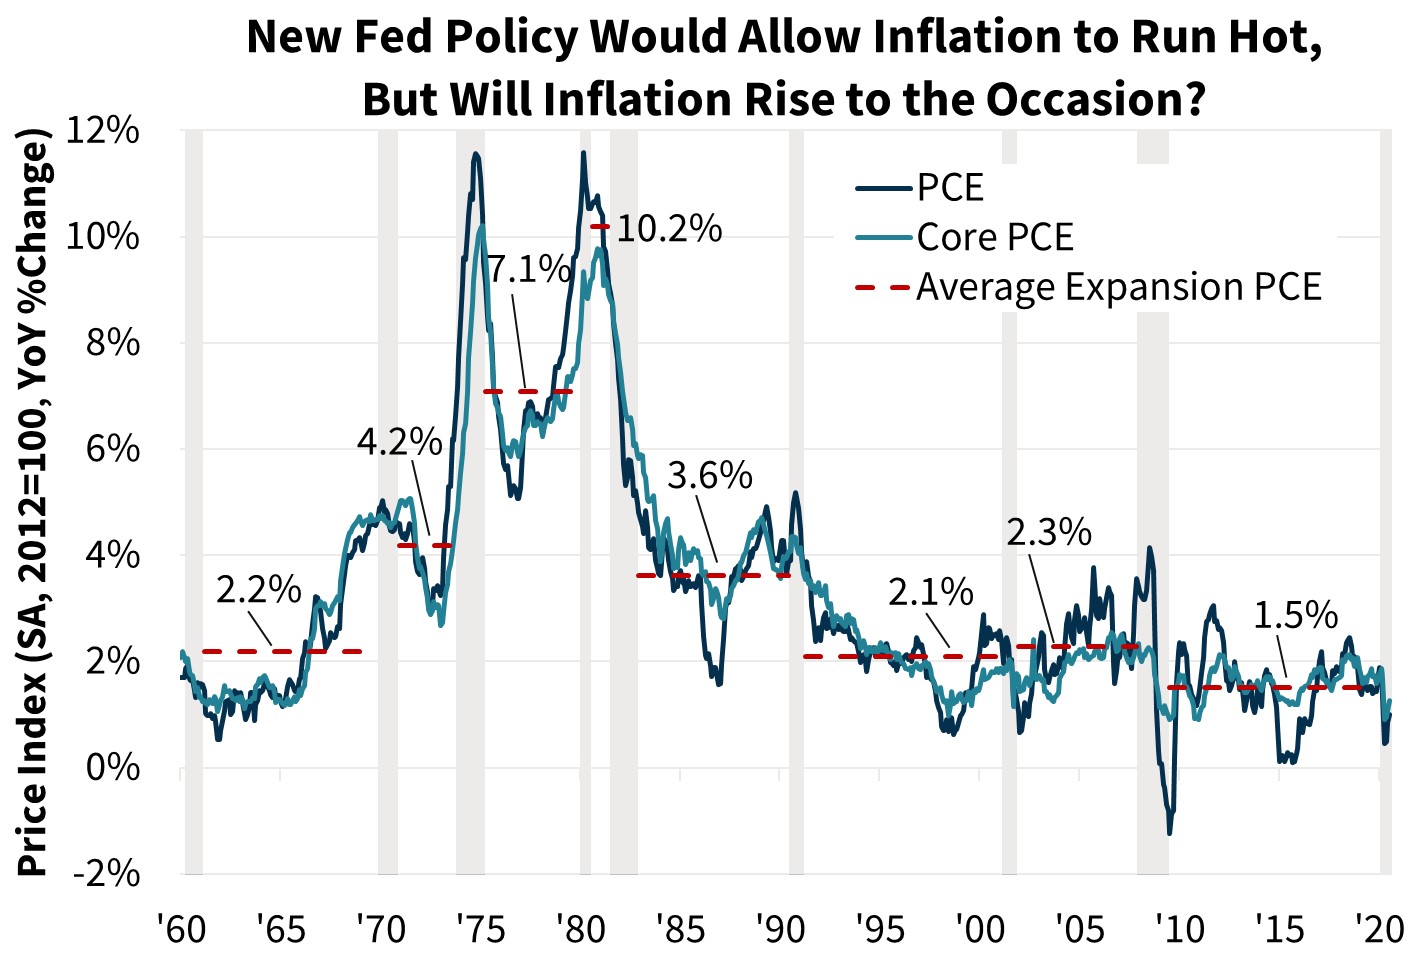  New Fed Policy Would Allow Inflation to Run Hot, But Will Inflation Rise to the Occasion 